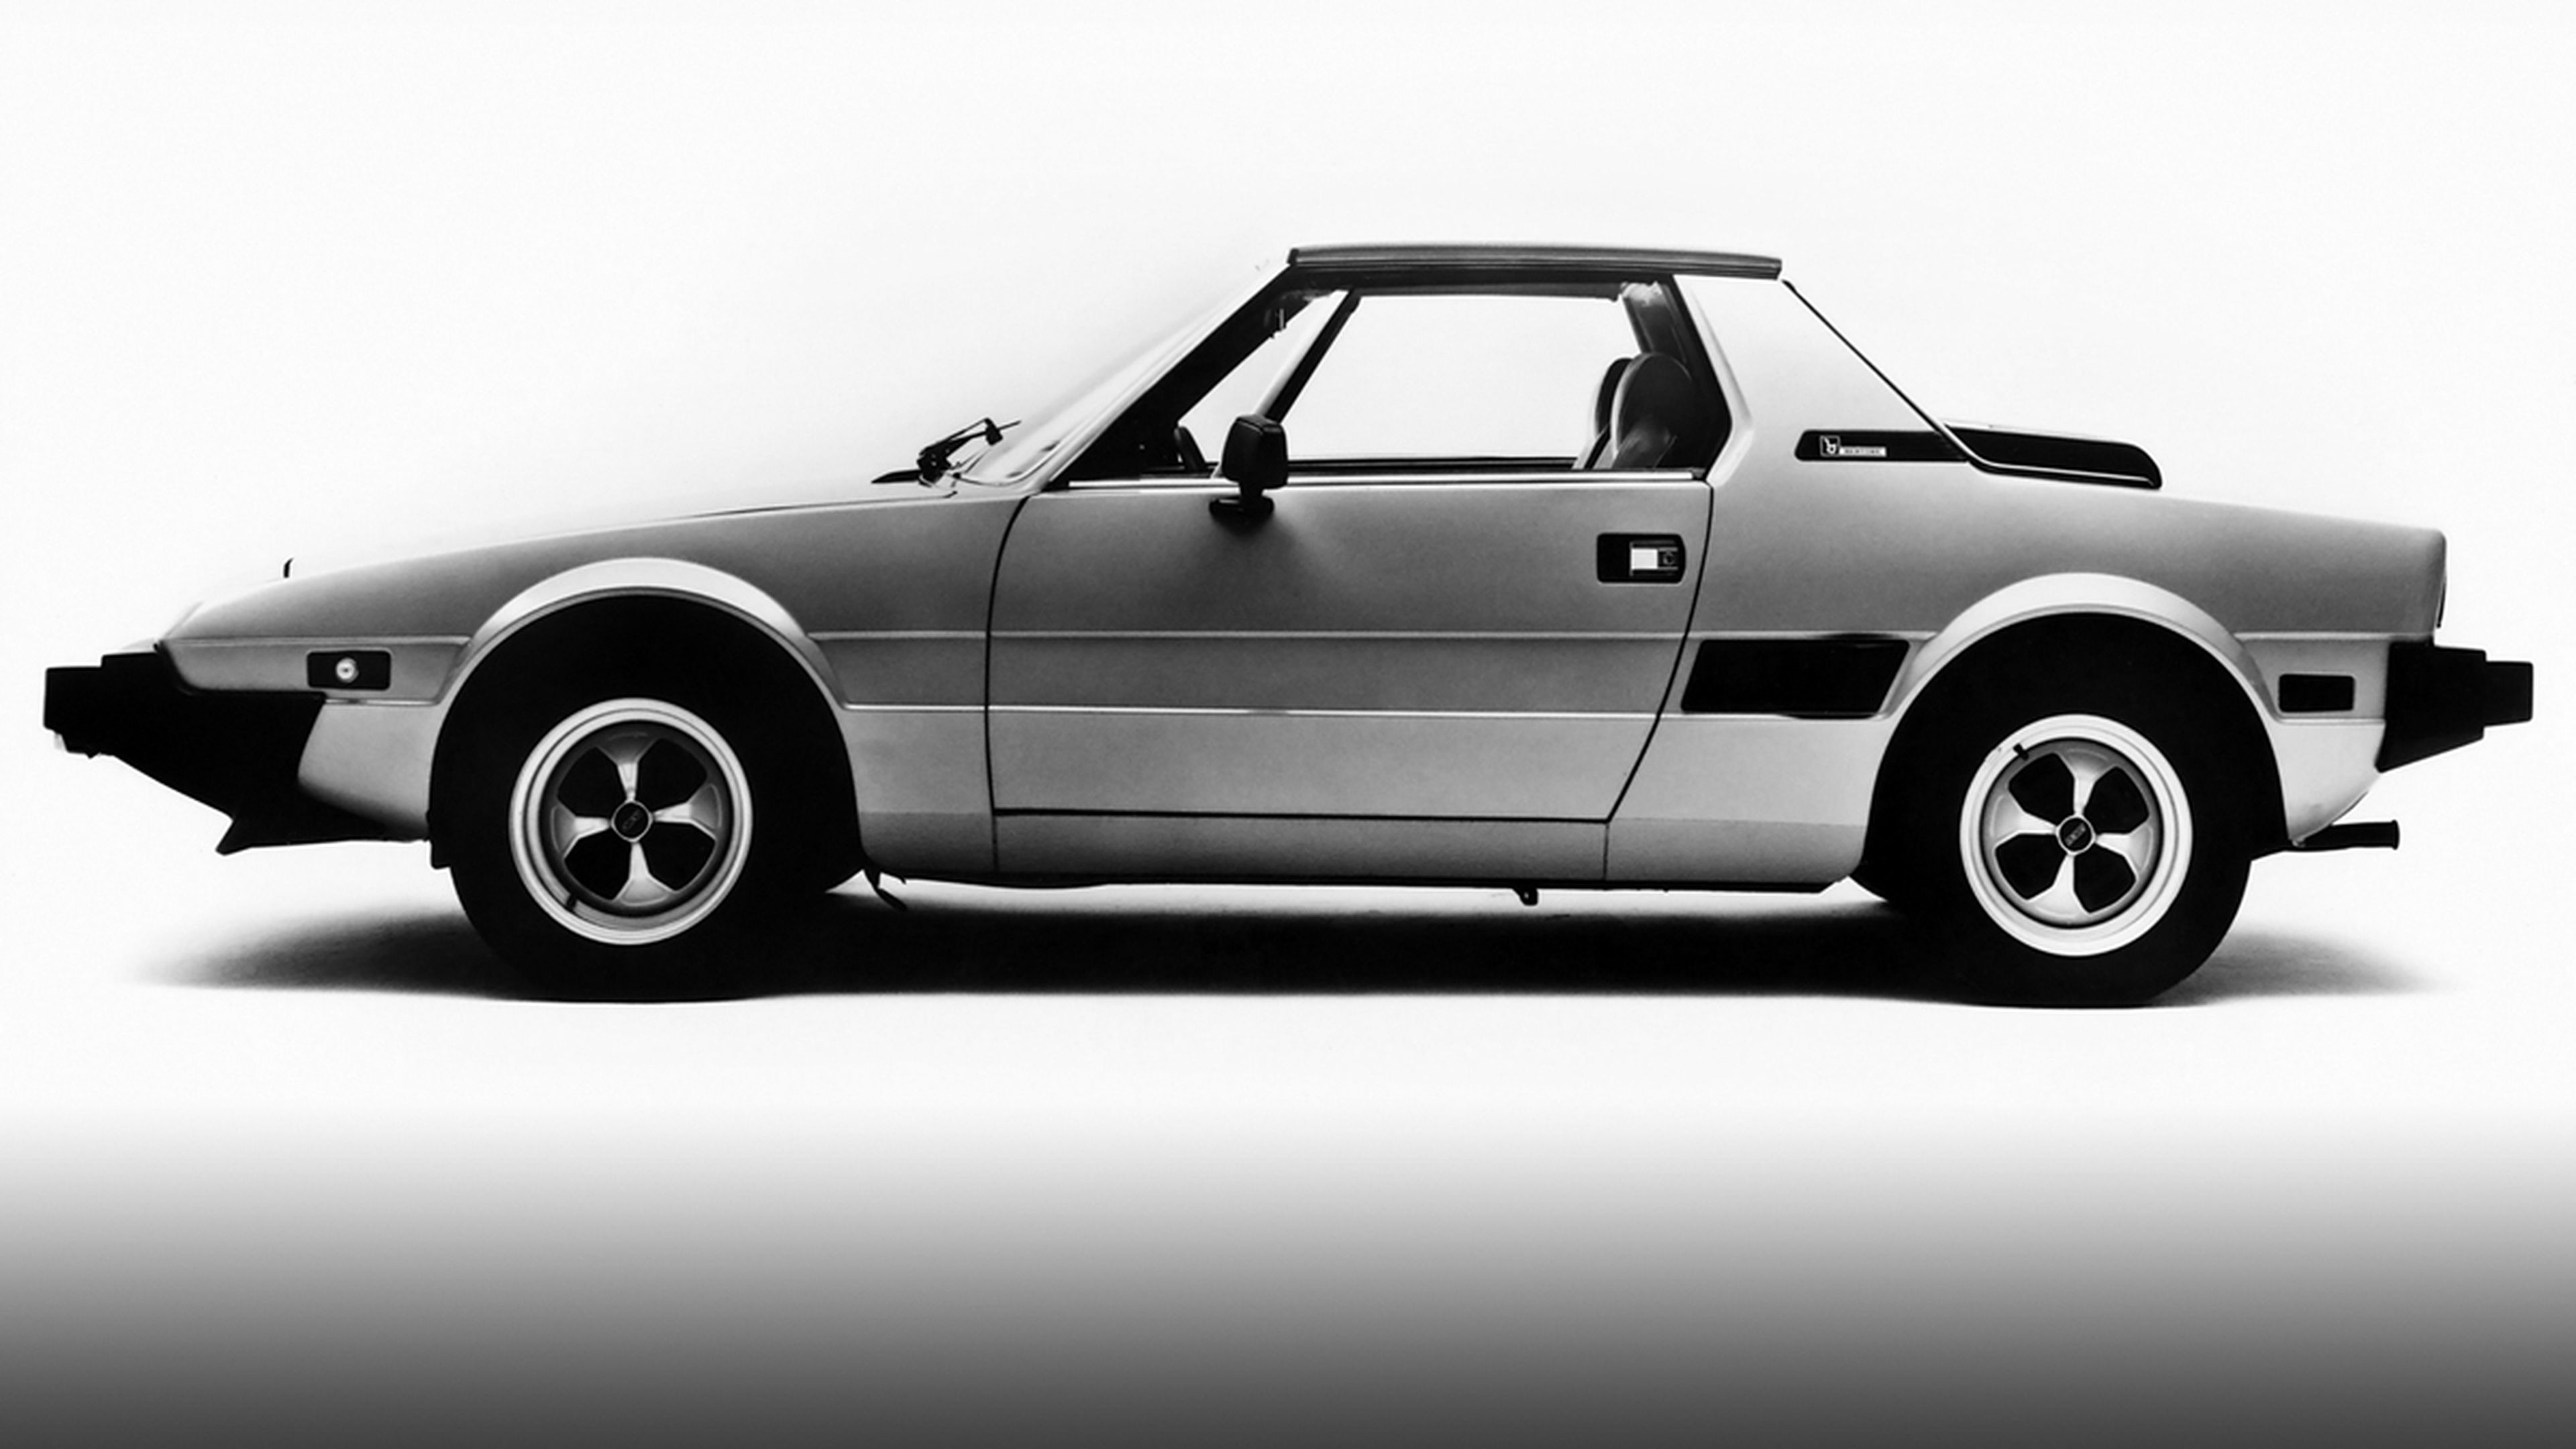 Fiat X1/9 - lateral